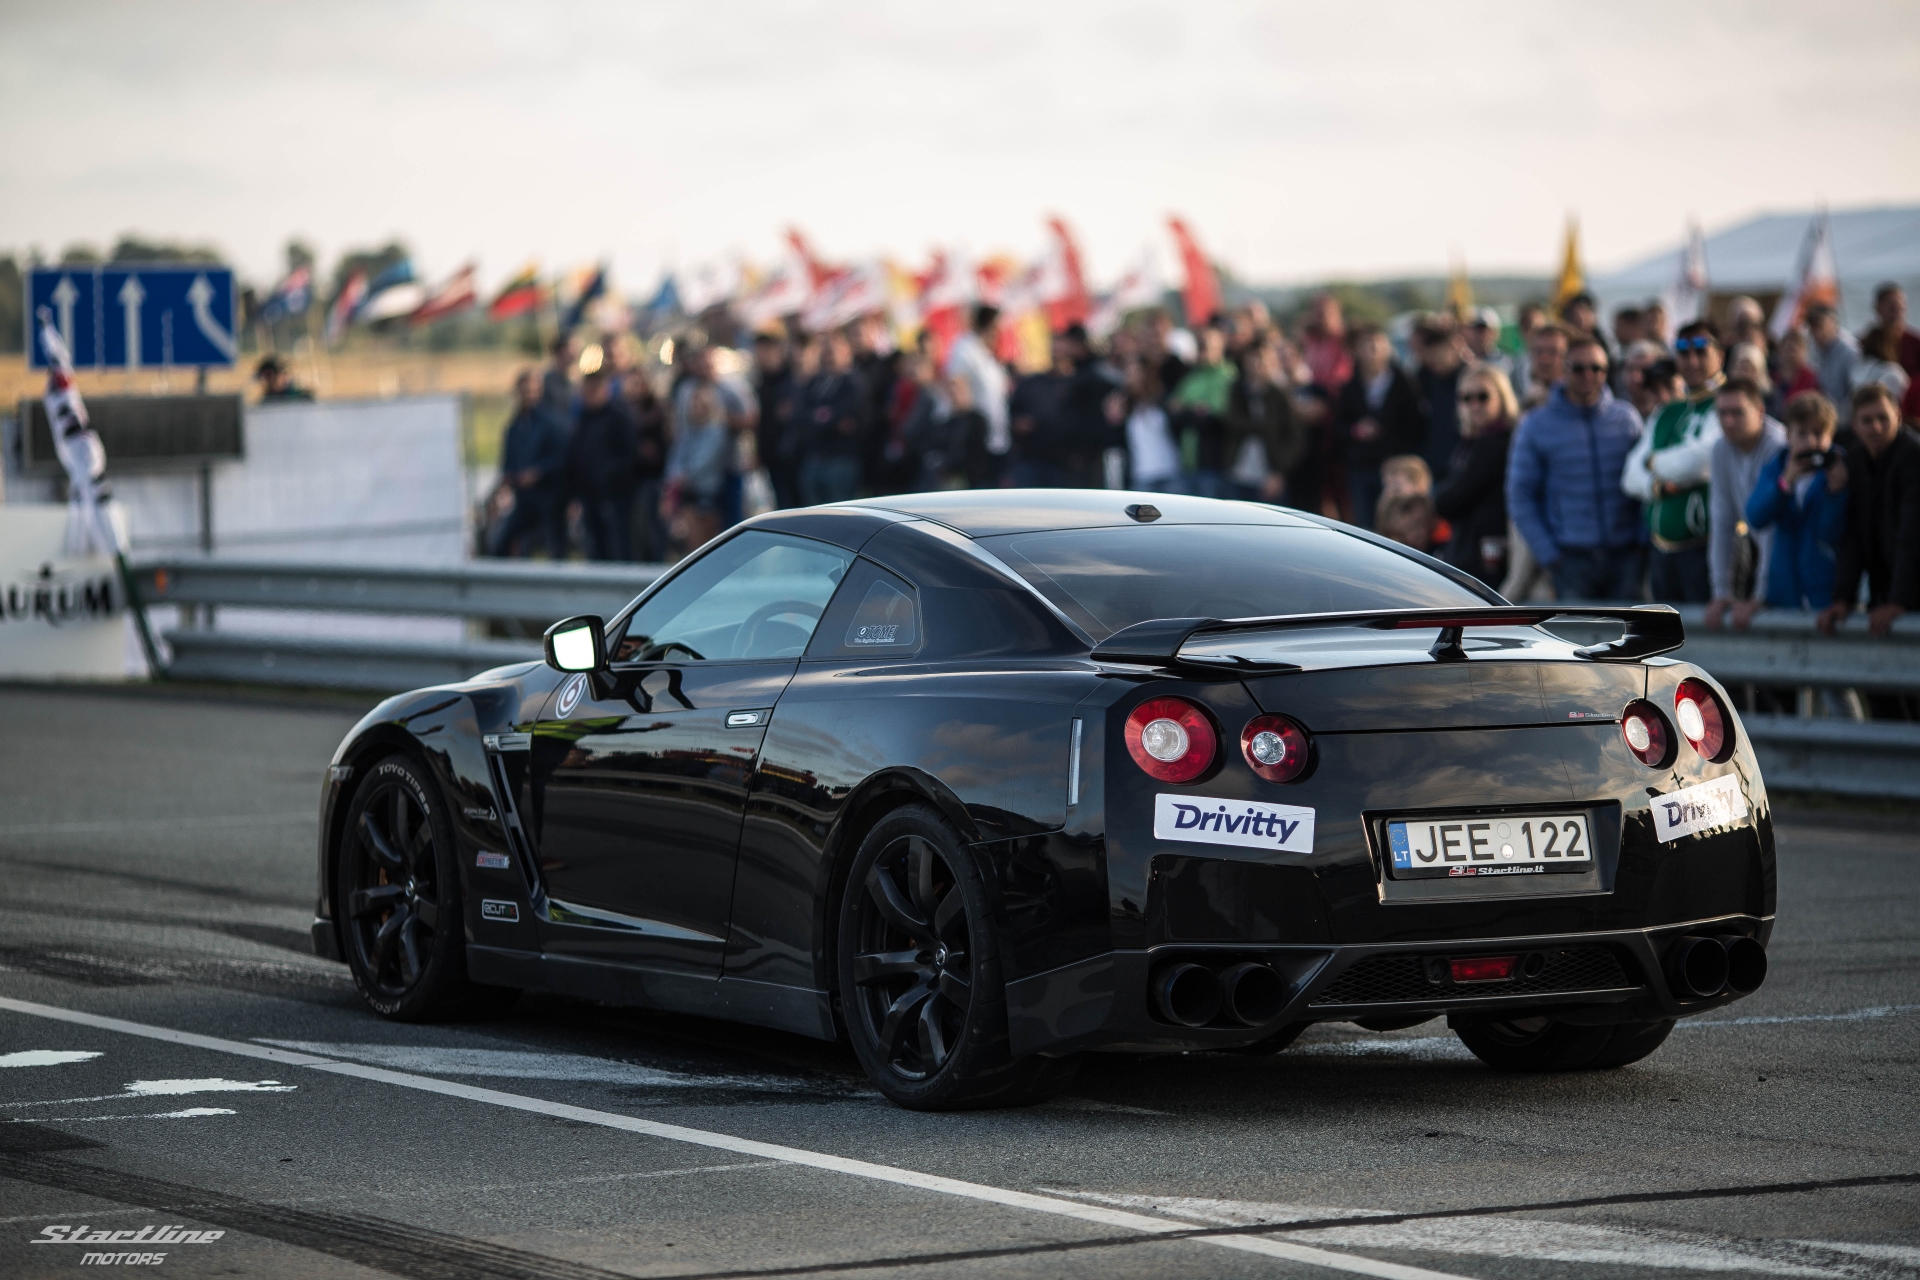 Creating the fastest car in Lithuania – Motors tuned Nissan GT-R R35